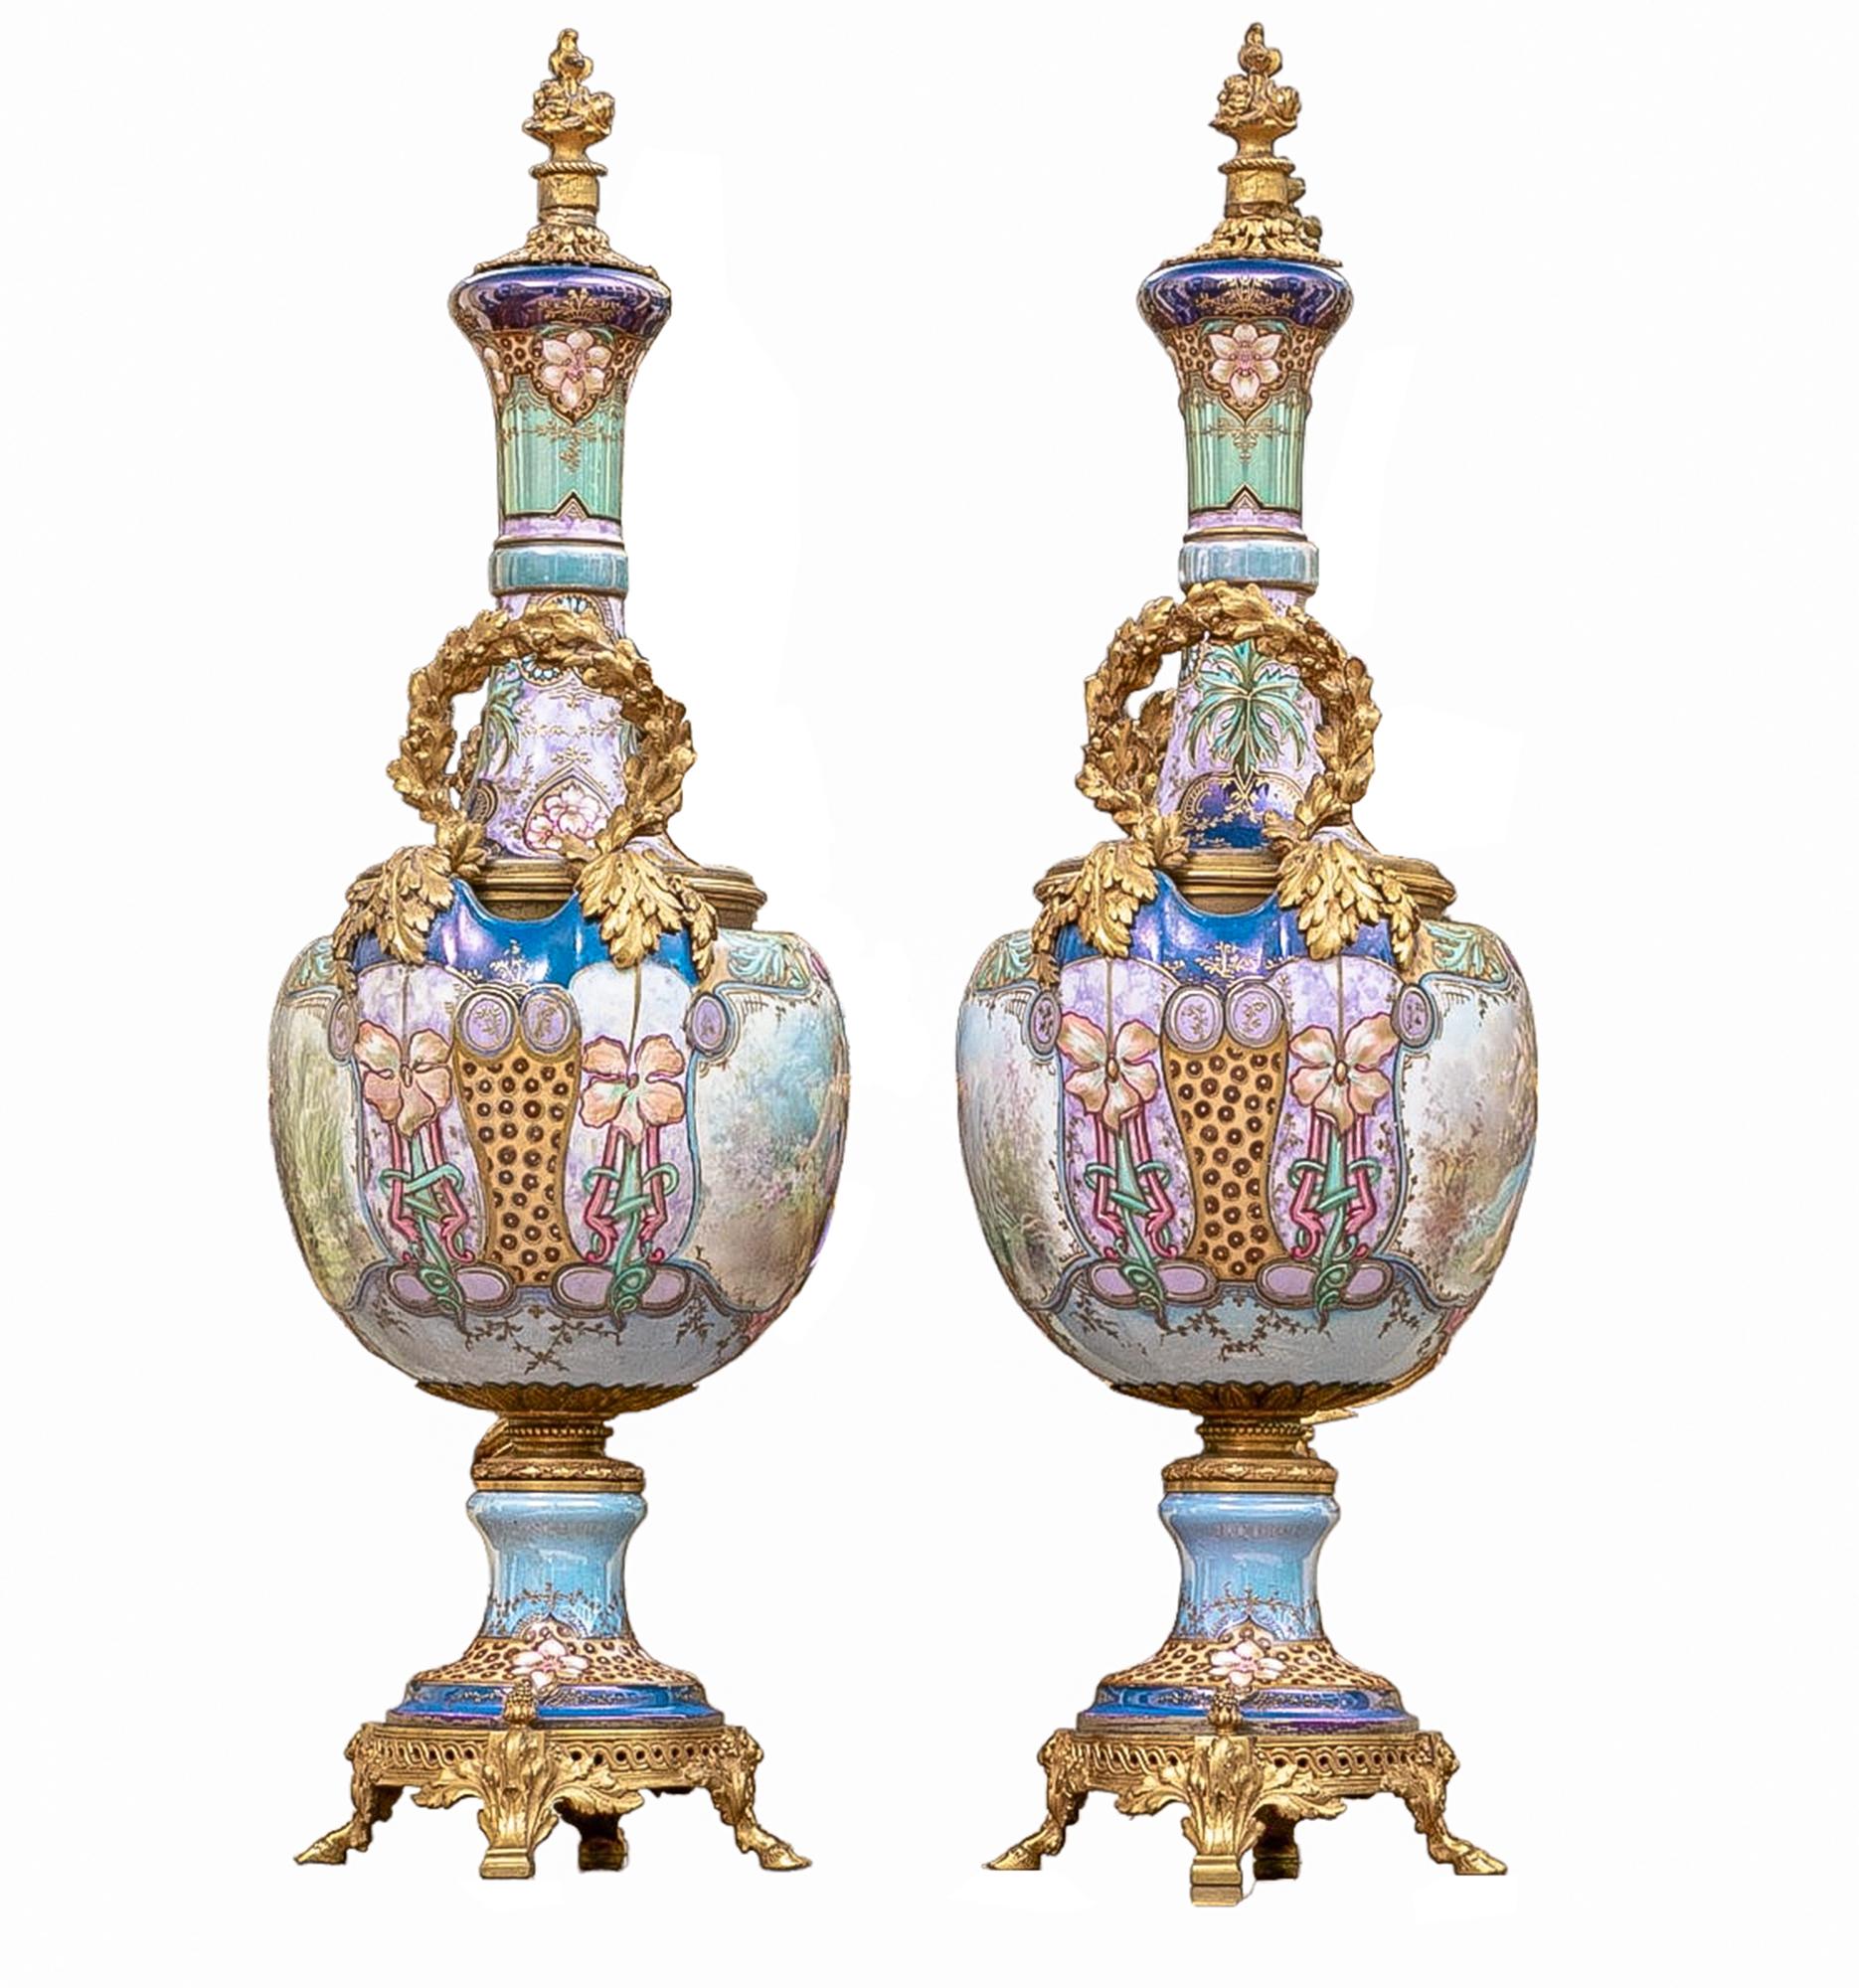  An antique pair of Sevres style, Art Nouveau inspired, ormulu mounted, hand painted porcelain urns, signed 